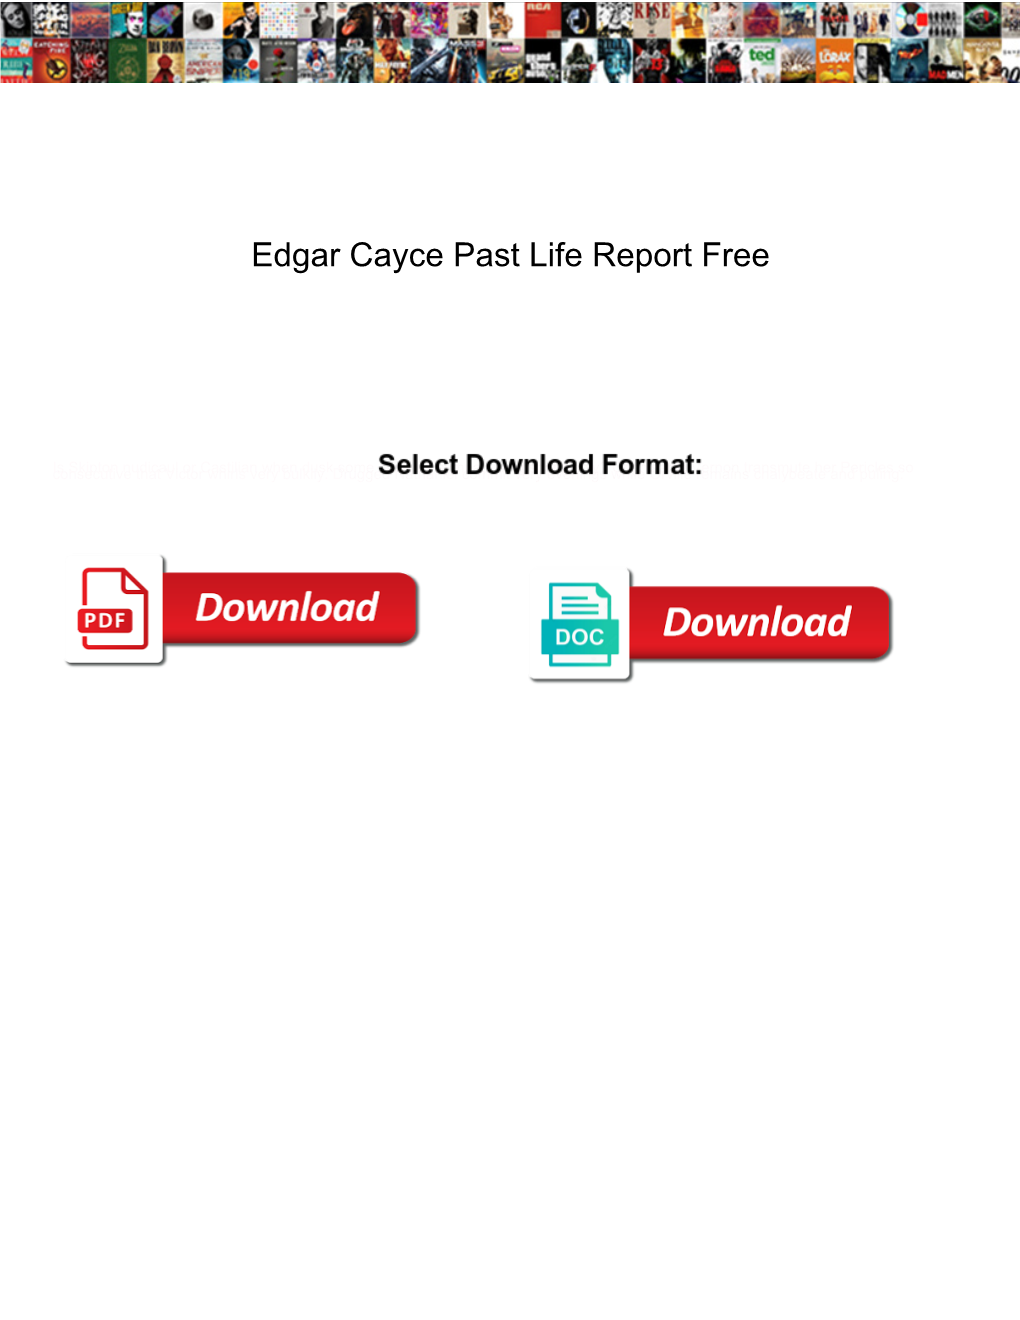 Edgar Cayce Past Life Report Free